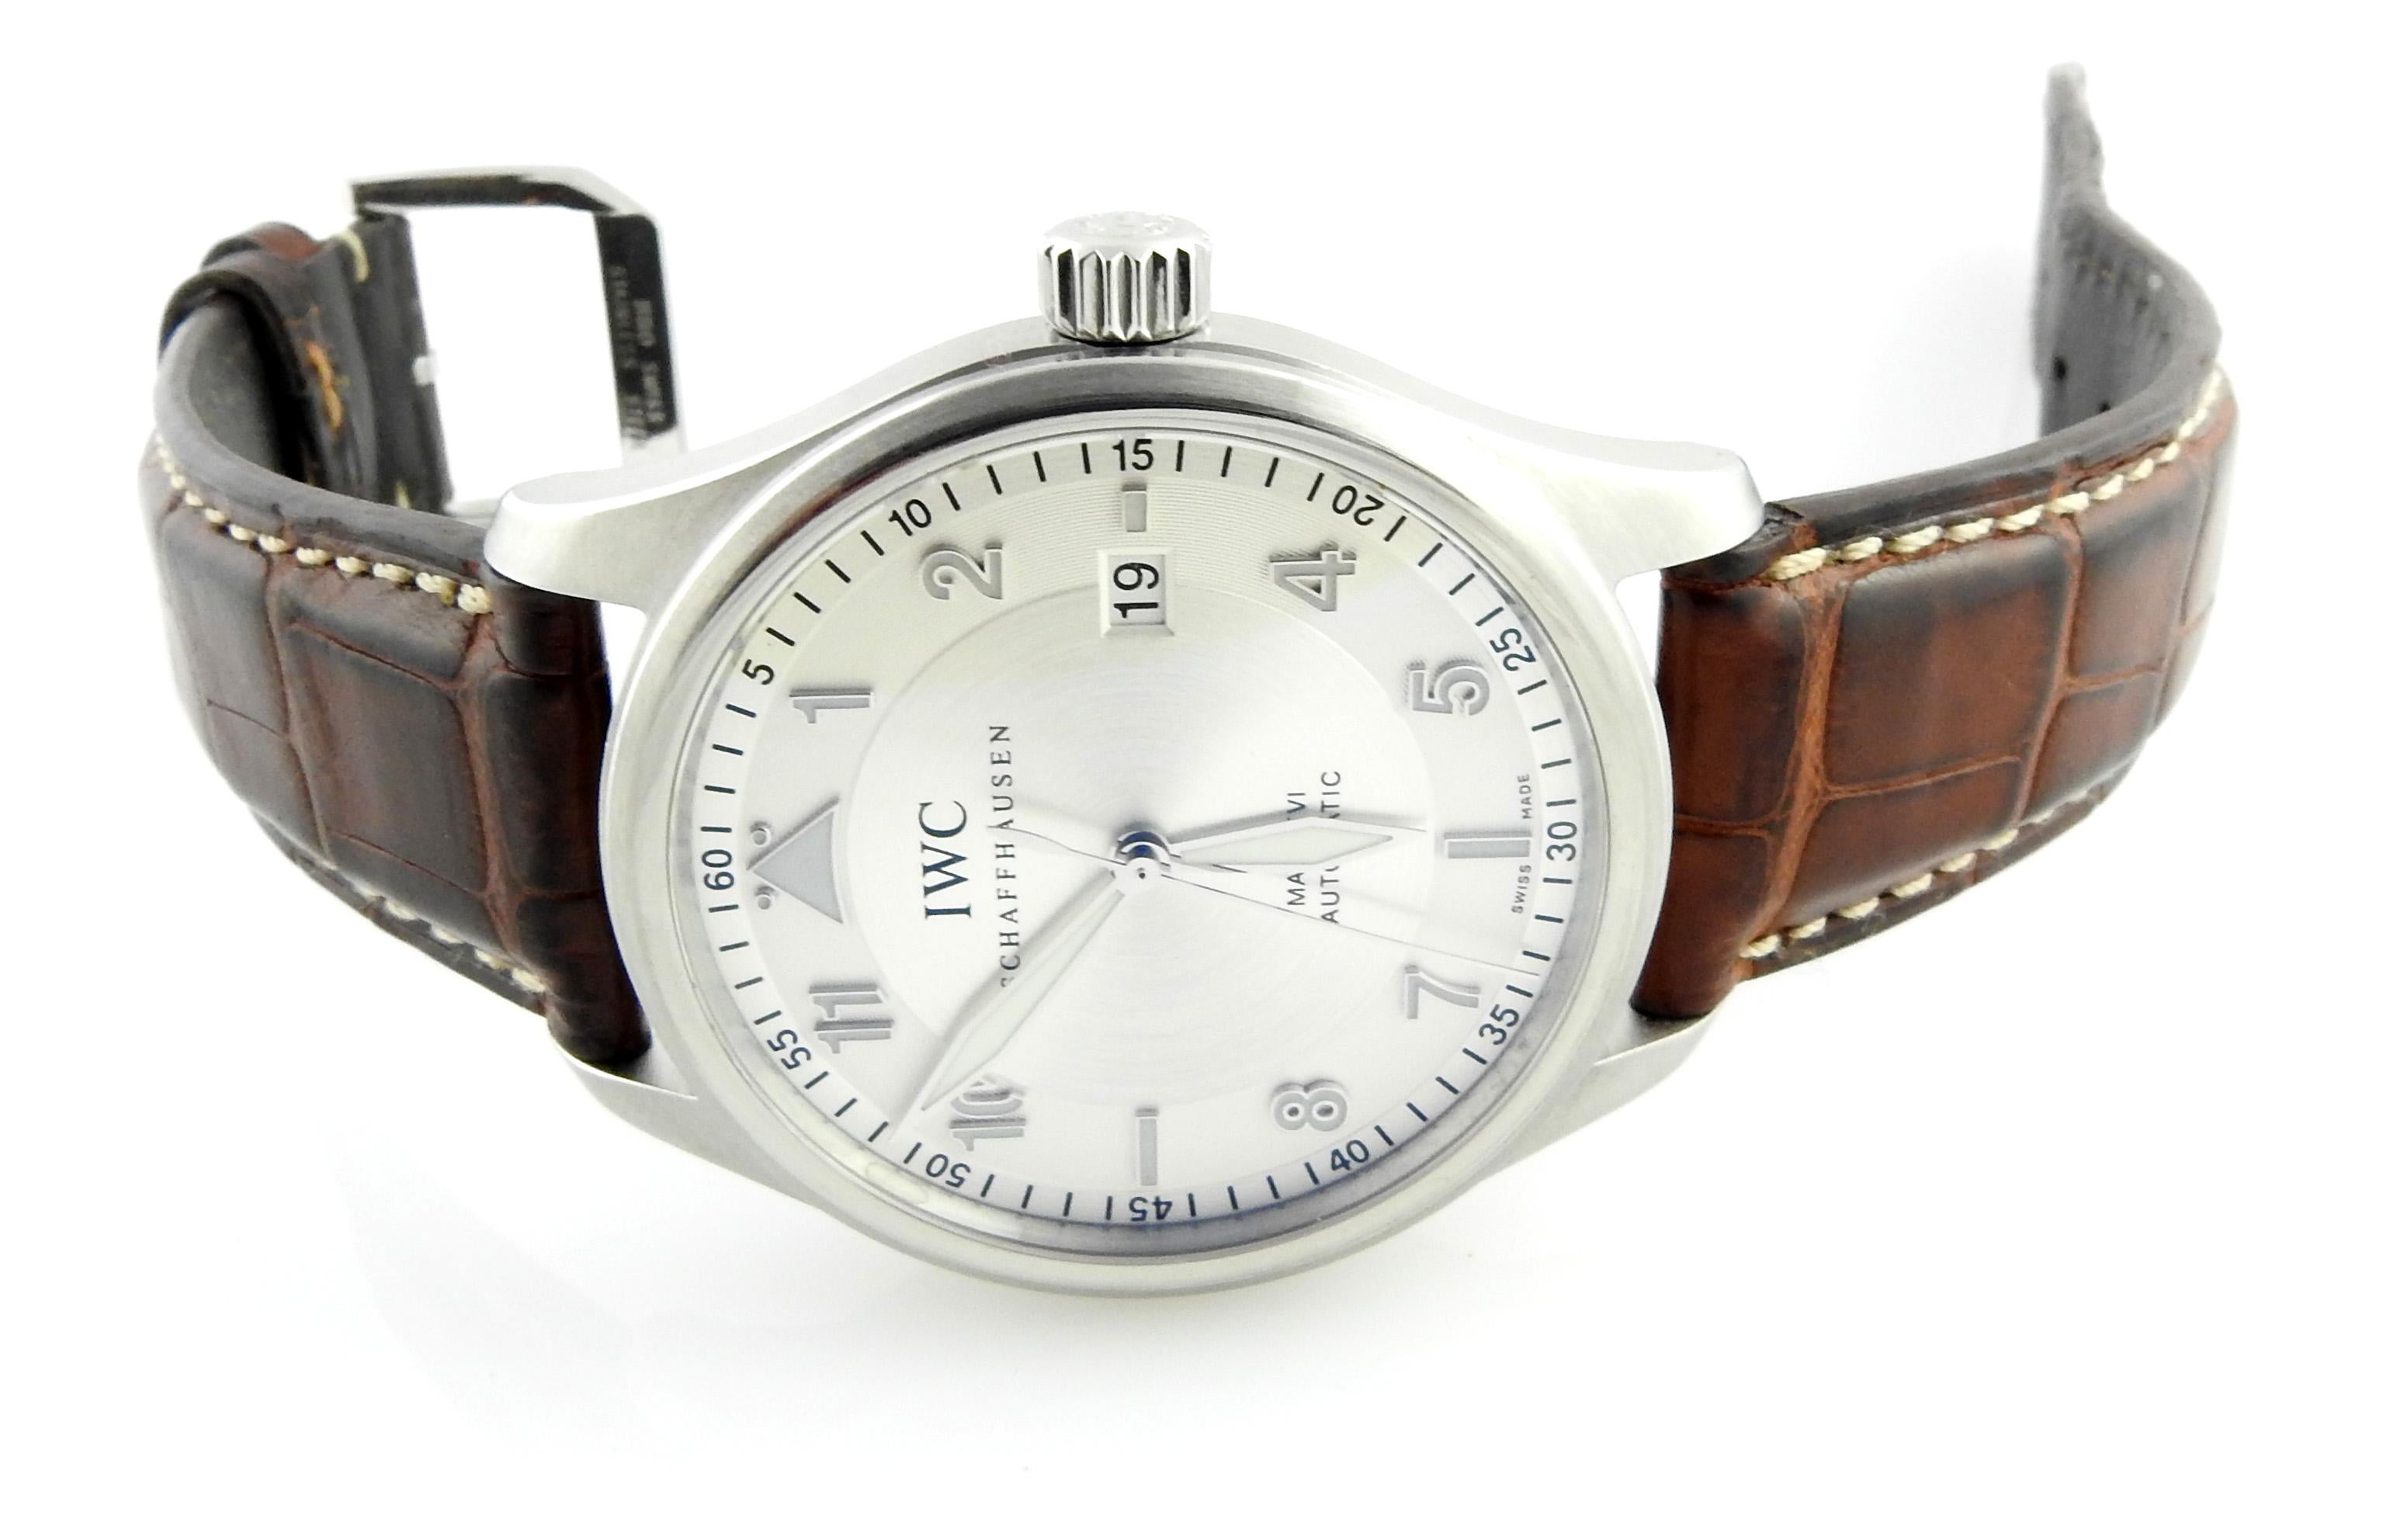 IWC Mark XVI Pilot Spitfire Men's Watch

Model: IW 3255-02
Serial: 3637774

Stainless Steel case with Spitfire Silver Dial

Case is 39mm

Automatic Movement

Brown leather IWC band with stainless clasp

Watch measures approx. 9 1/4 